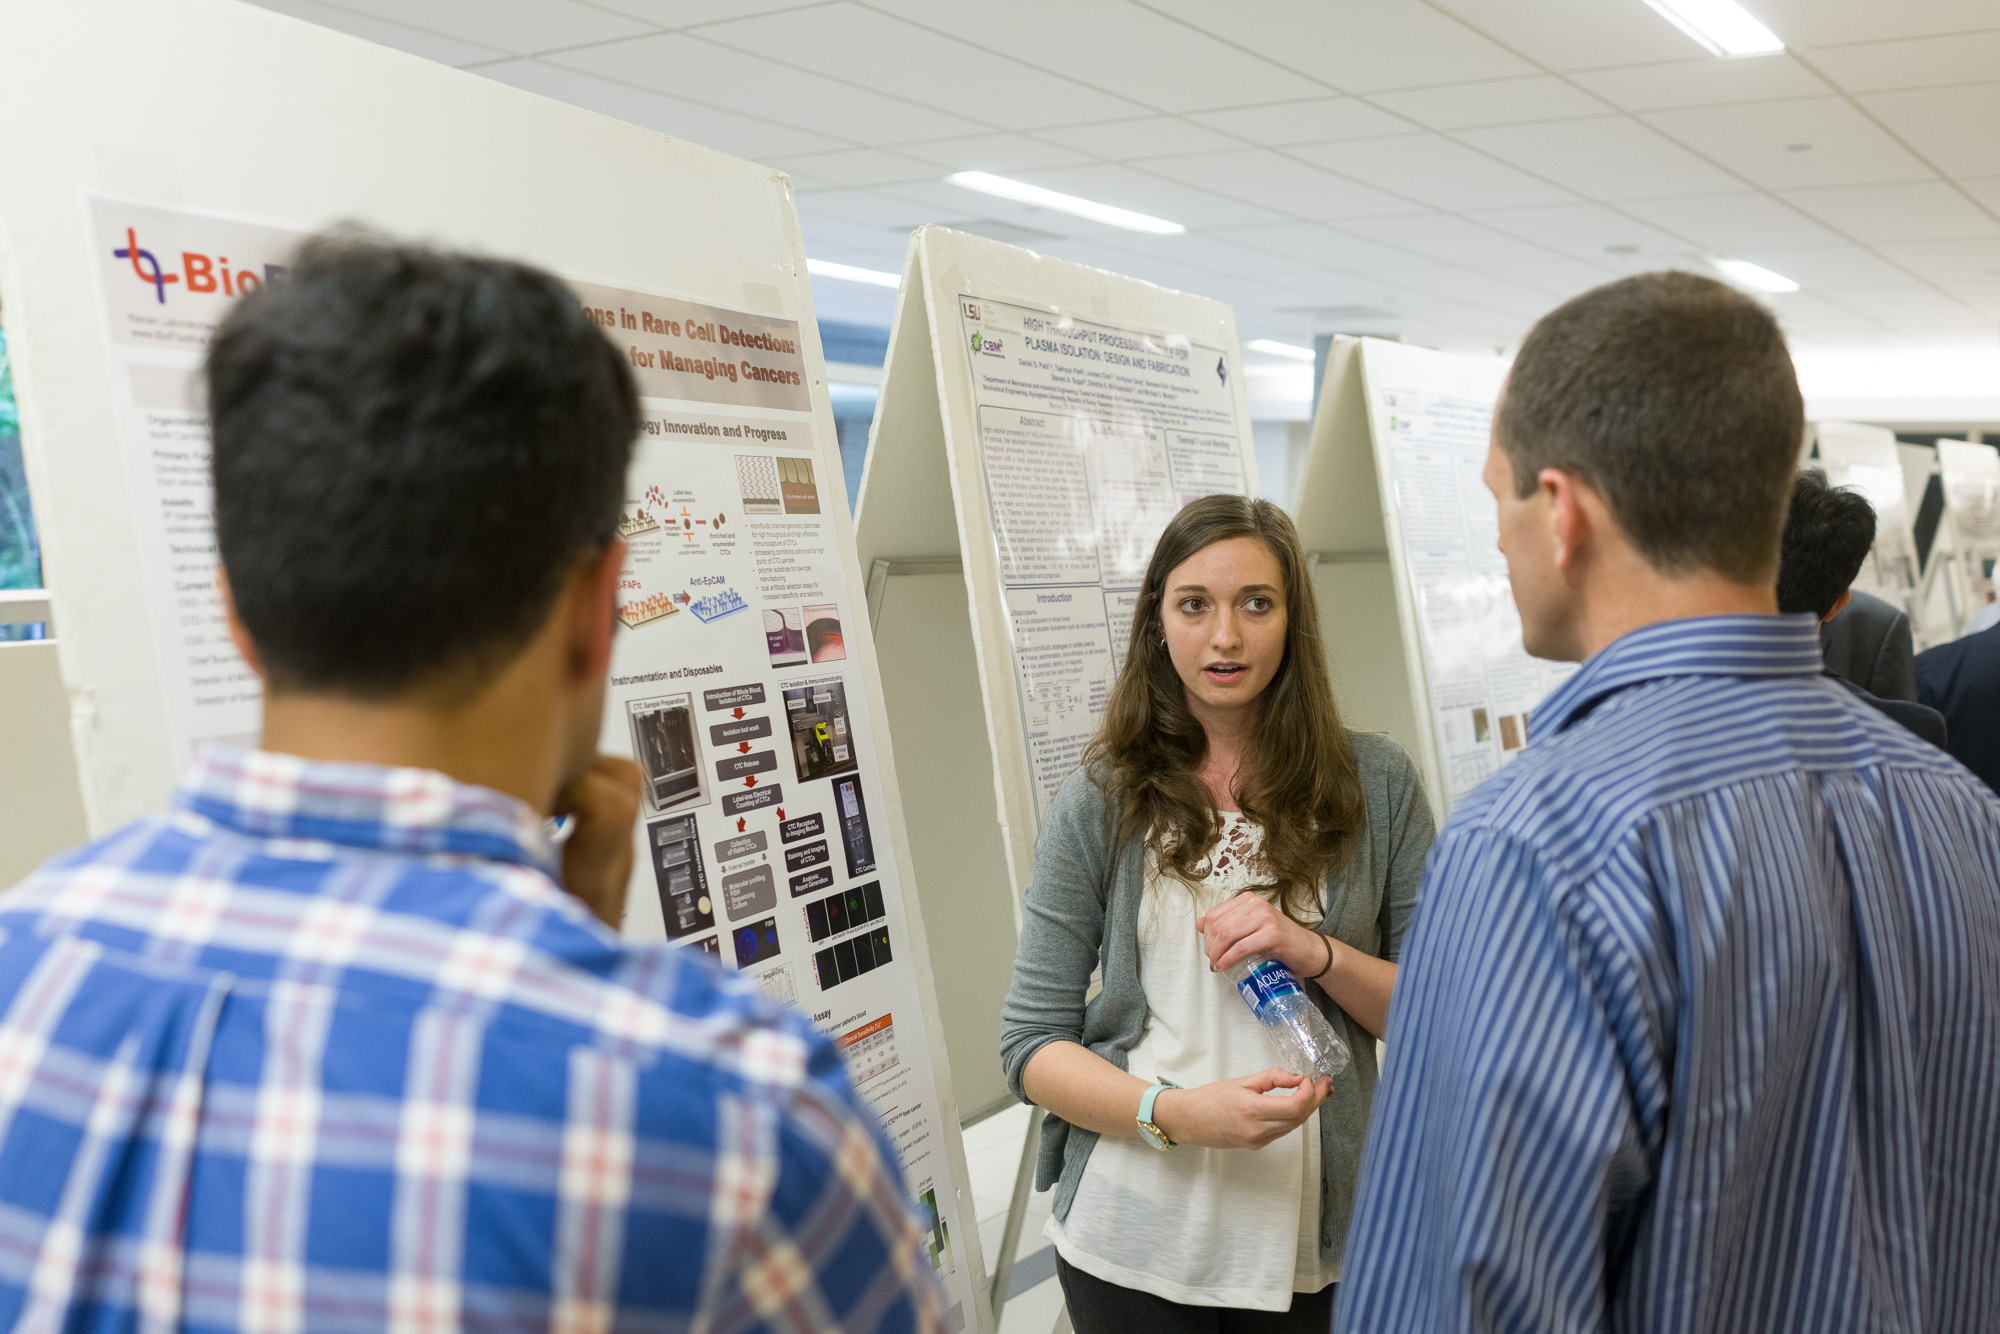 A woman discusses her research poster with attendees at an academic event.